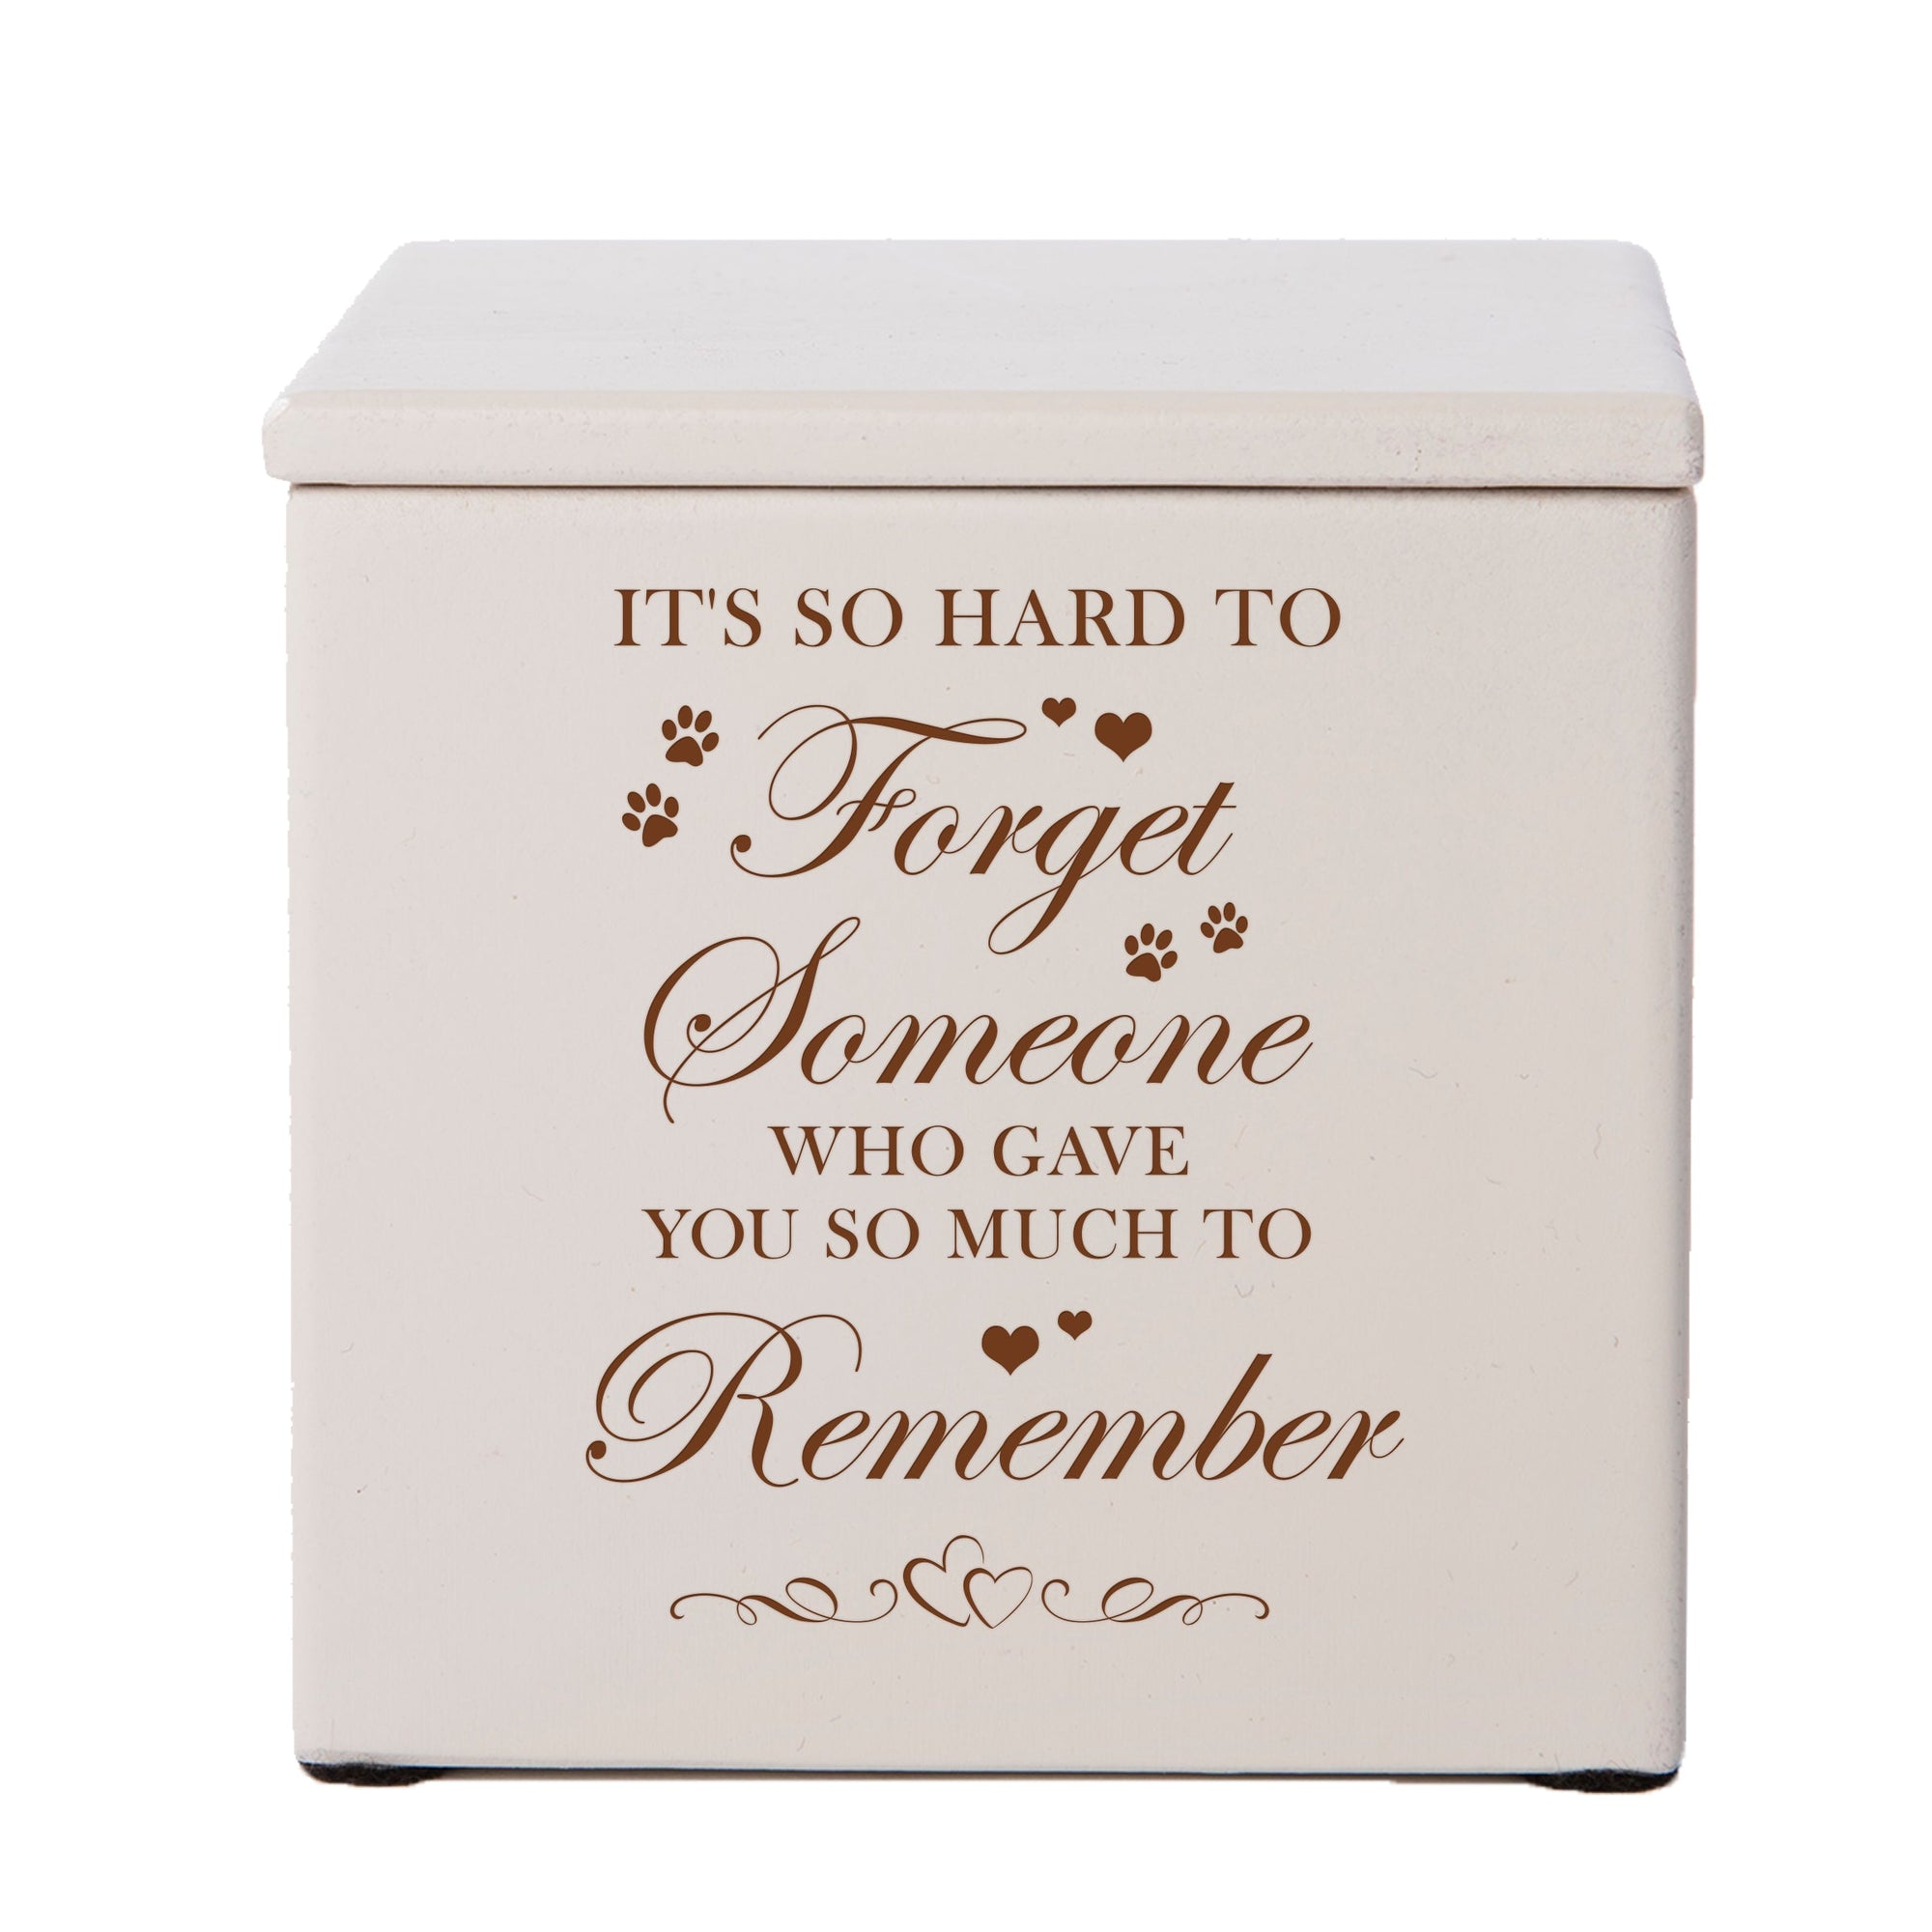 Pet Memorial Keepsake Cremation Urn Box for Dog or Cat - It's So Hard To Forget